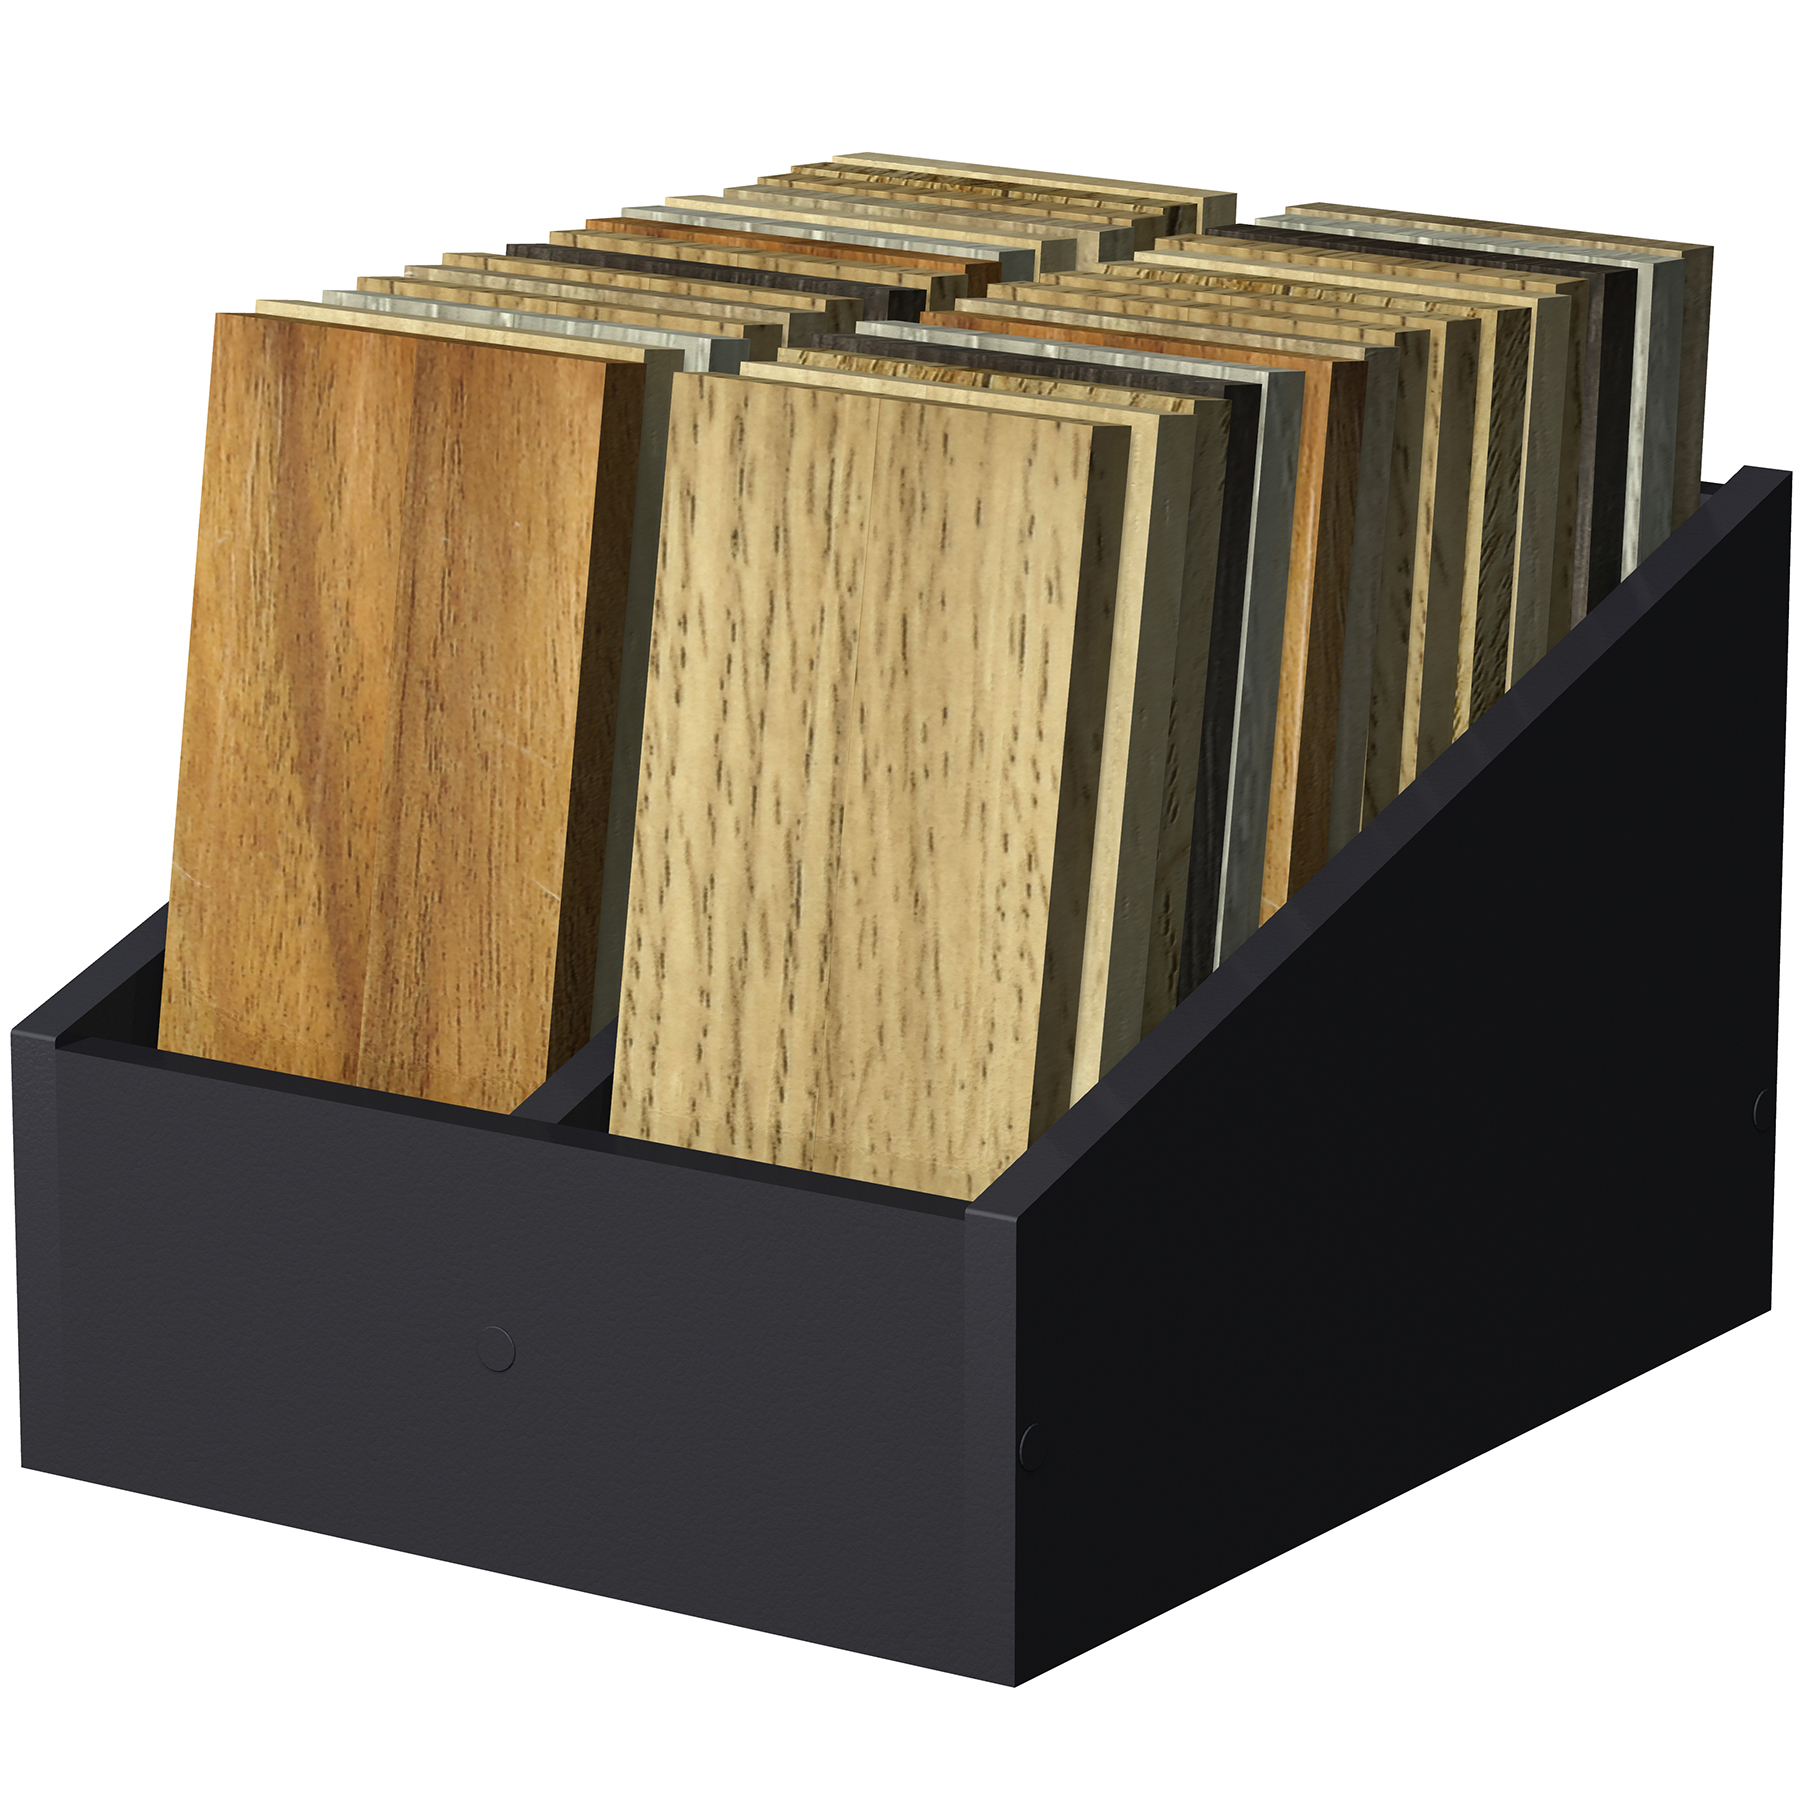 Counter or Tabletop Box for Hardwood Laminate Bamboo Reclaimed Wood Plank Samples Showroom Display Made in the USA